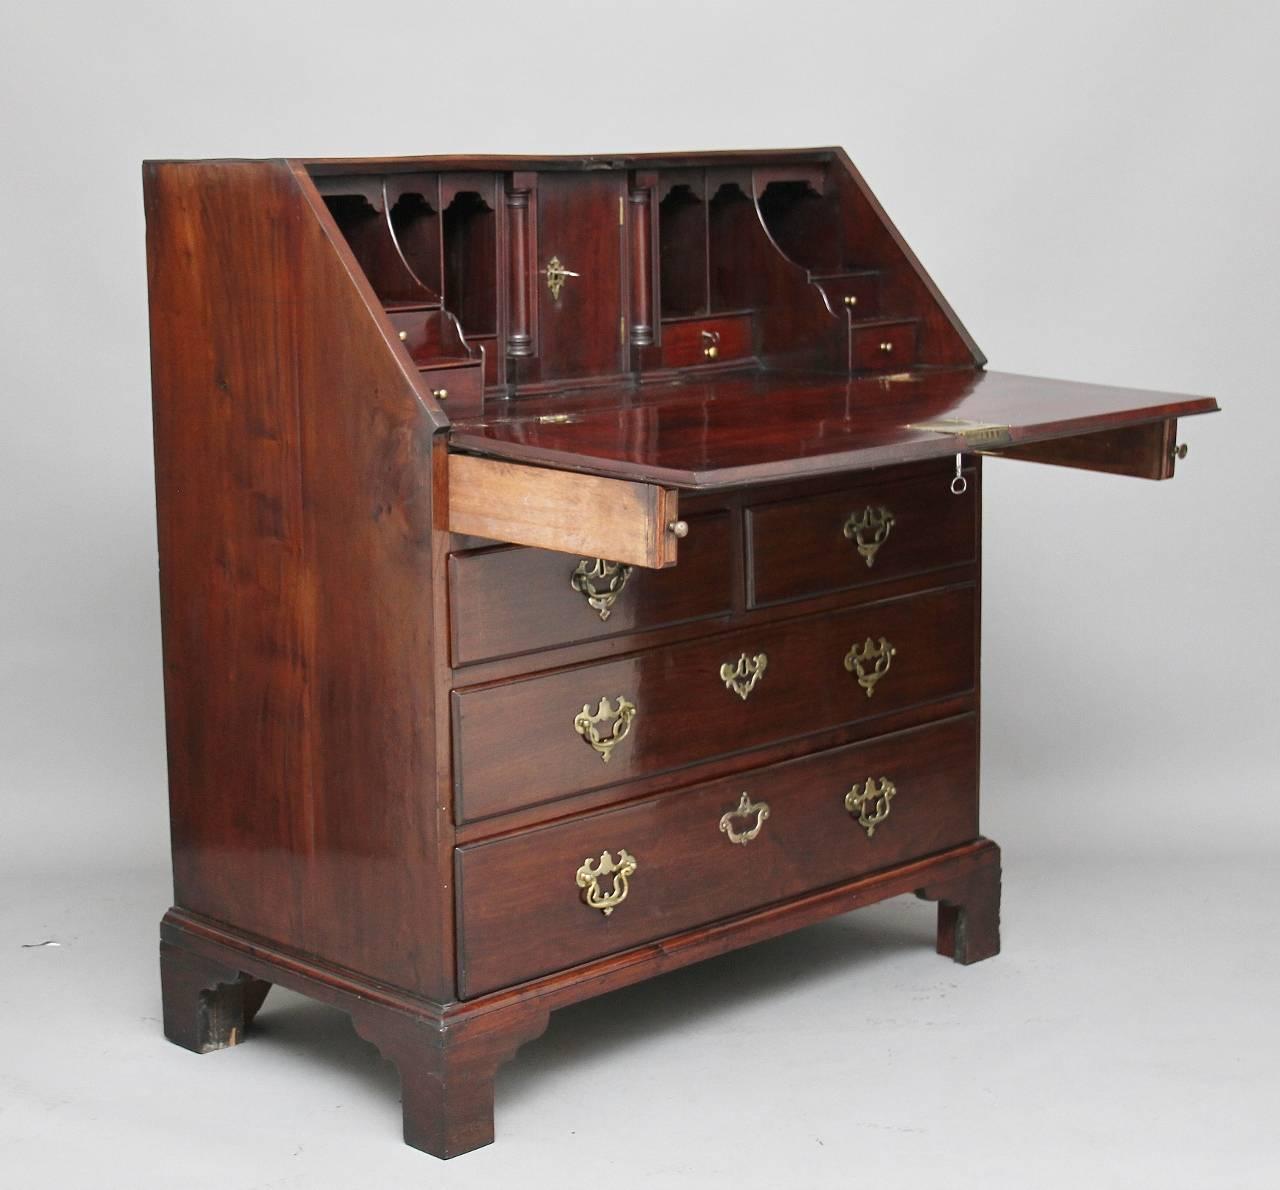 A fantastic quality 18th century Georgian mahogany bureau with a lovely fitted interior with various drawers and compartments, with a hinged door in the centre with pull out slides either side, all drawers, including the door has workable locks with